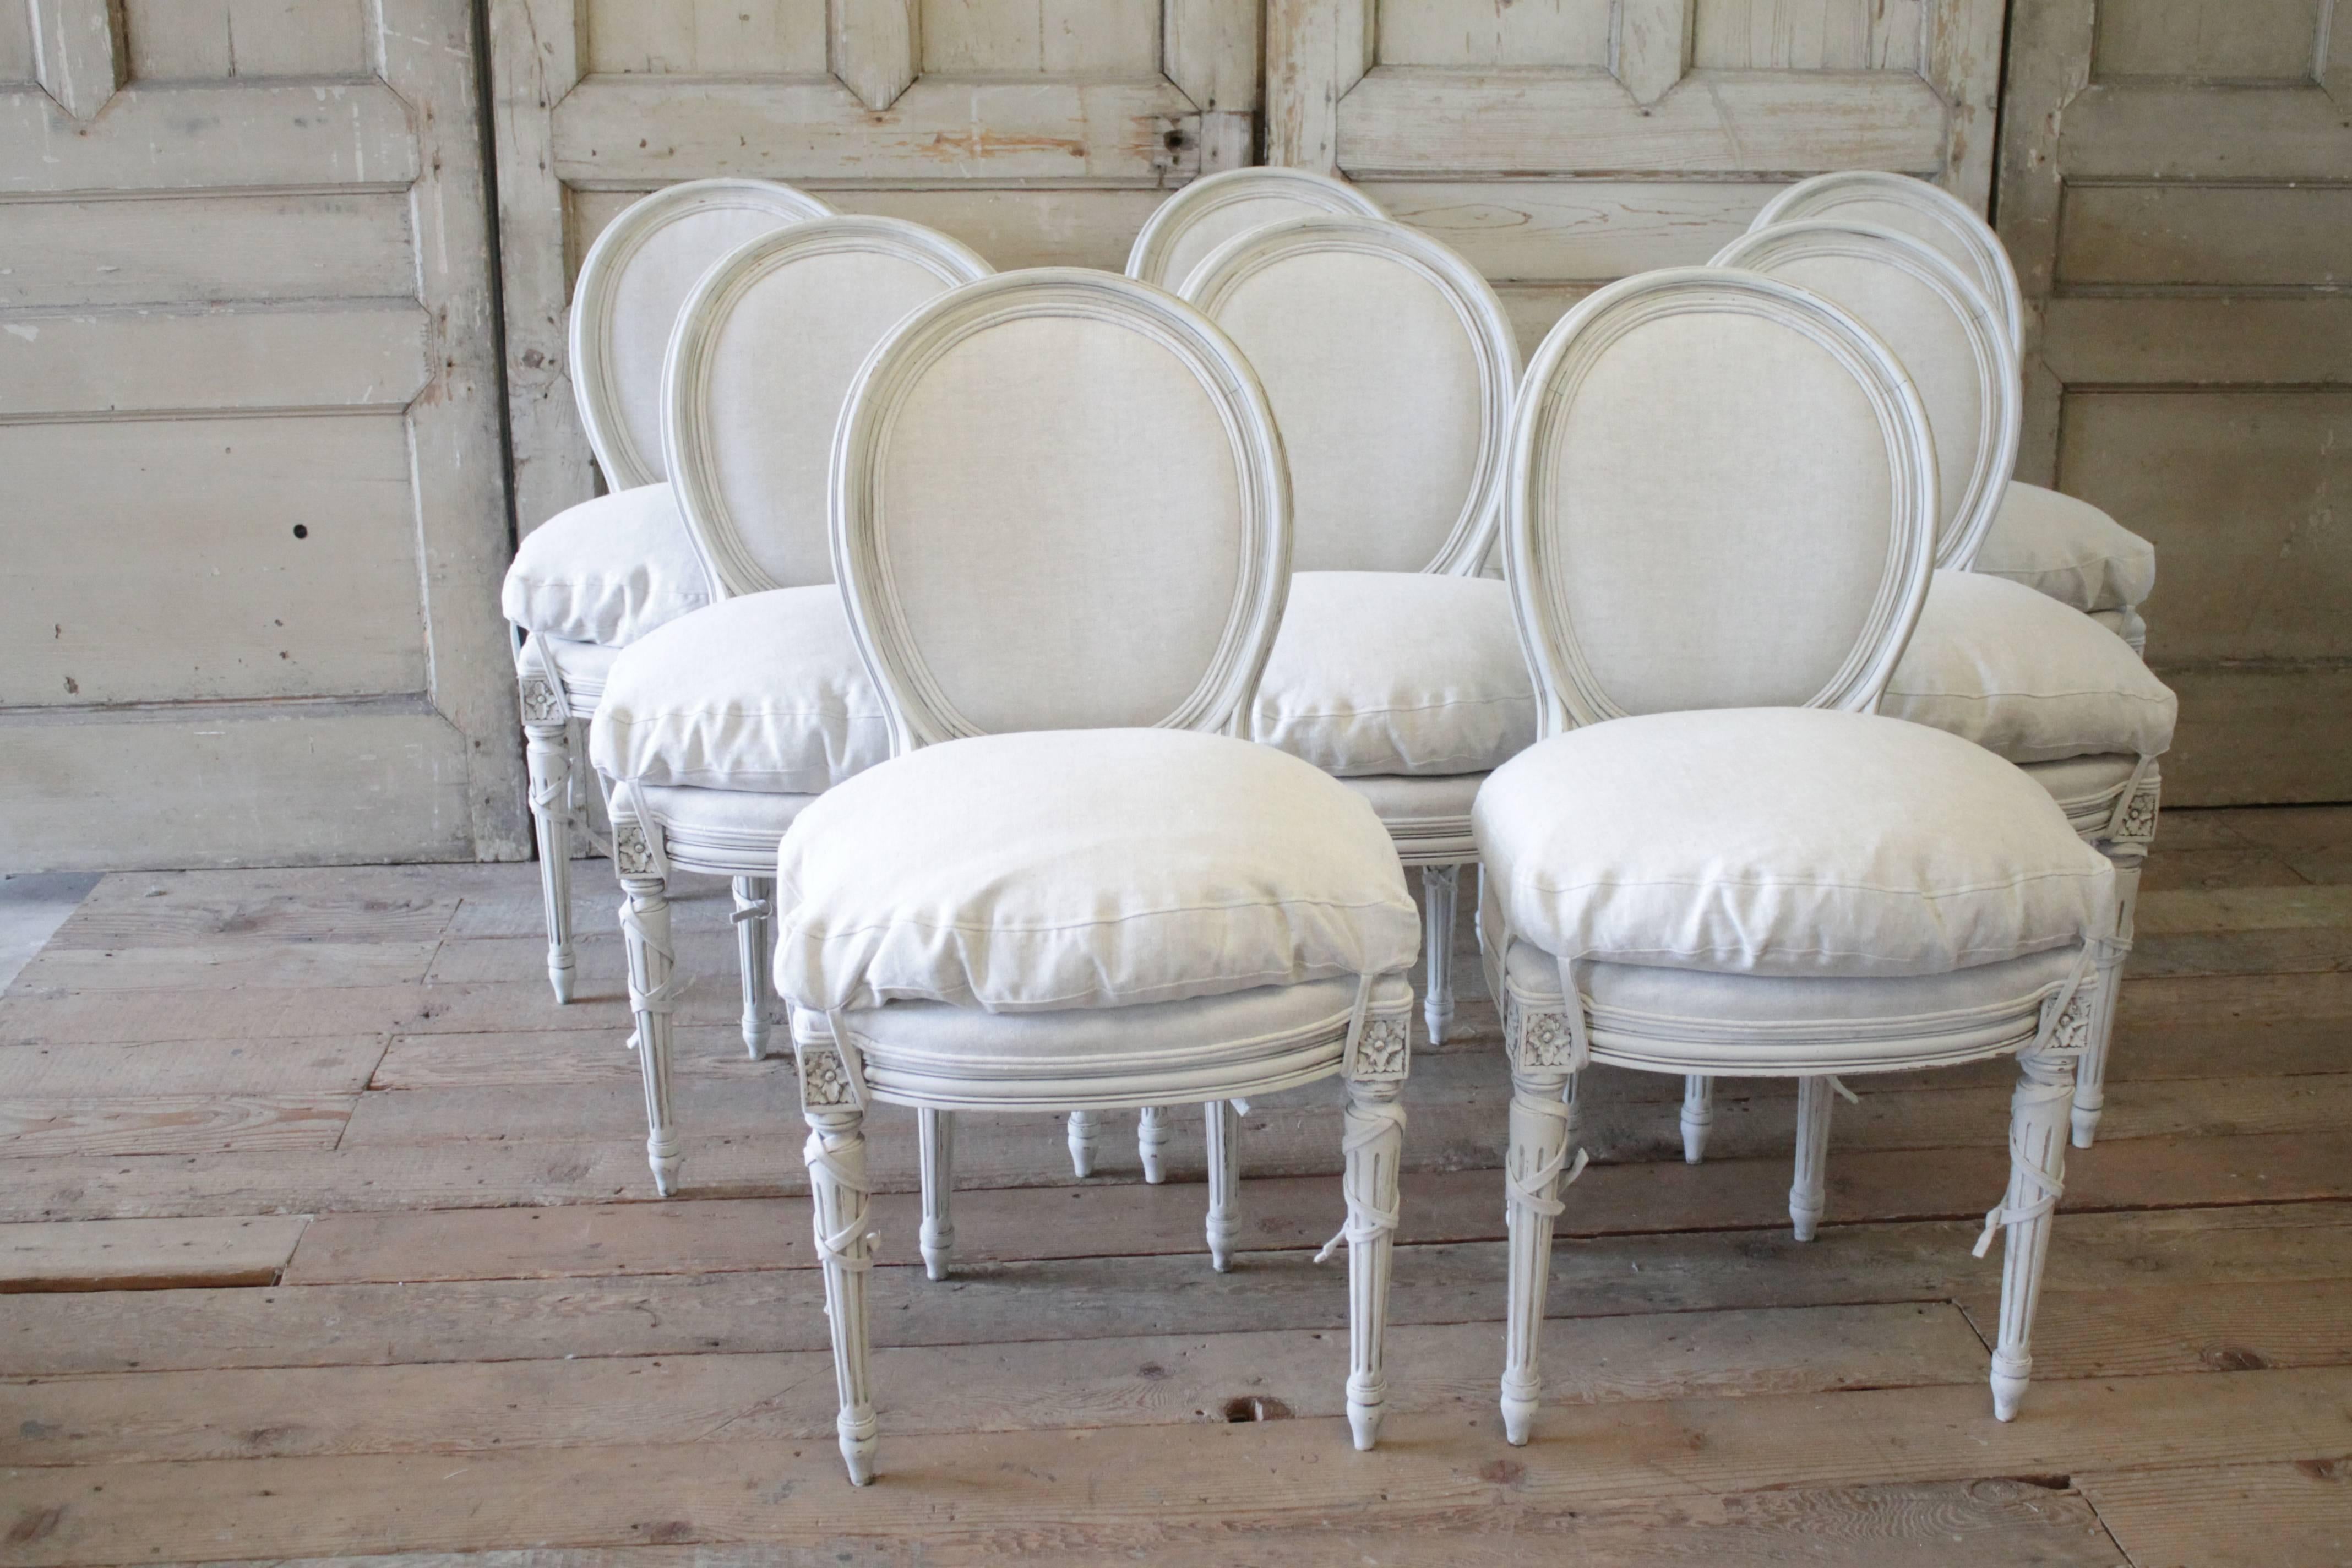 Lovely set of eight upholstered Louis XVI Style dining chairs. Painted in our signature oyster white finish, with subtle distressed edges, and upholstered in a greige (natural oatmeal) Belgian linen. The painted frame is a combination of off-white,